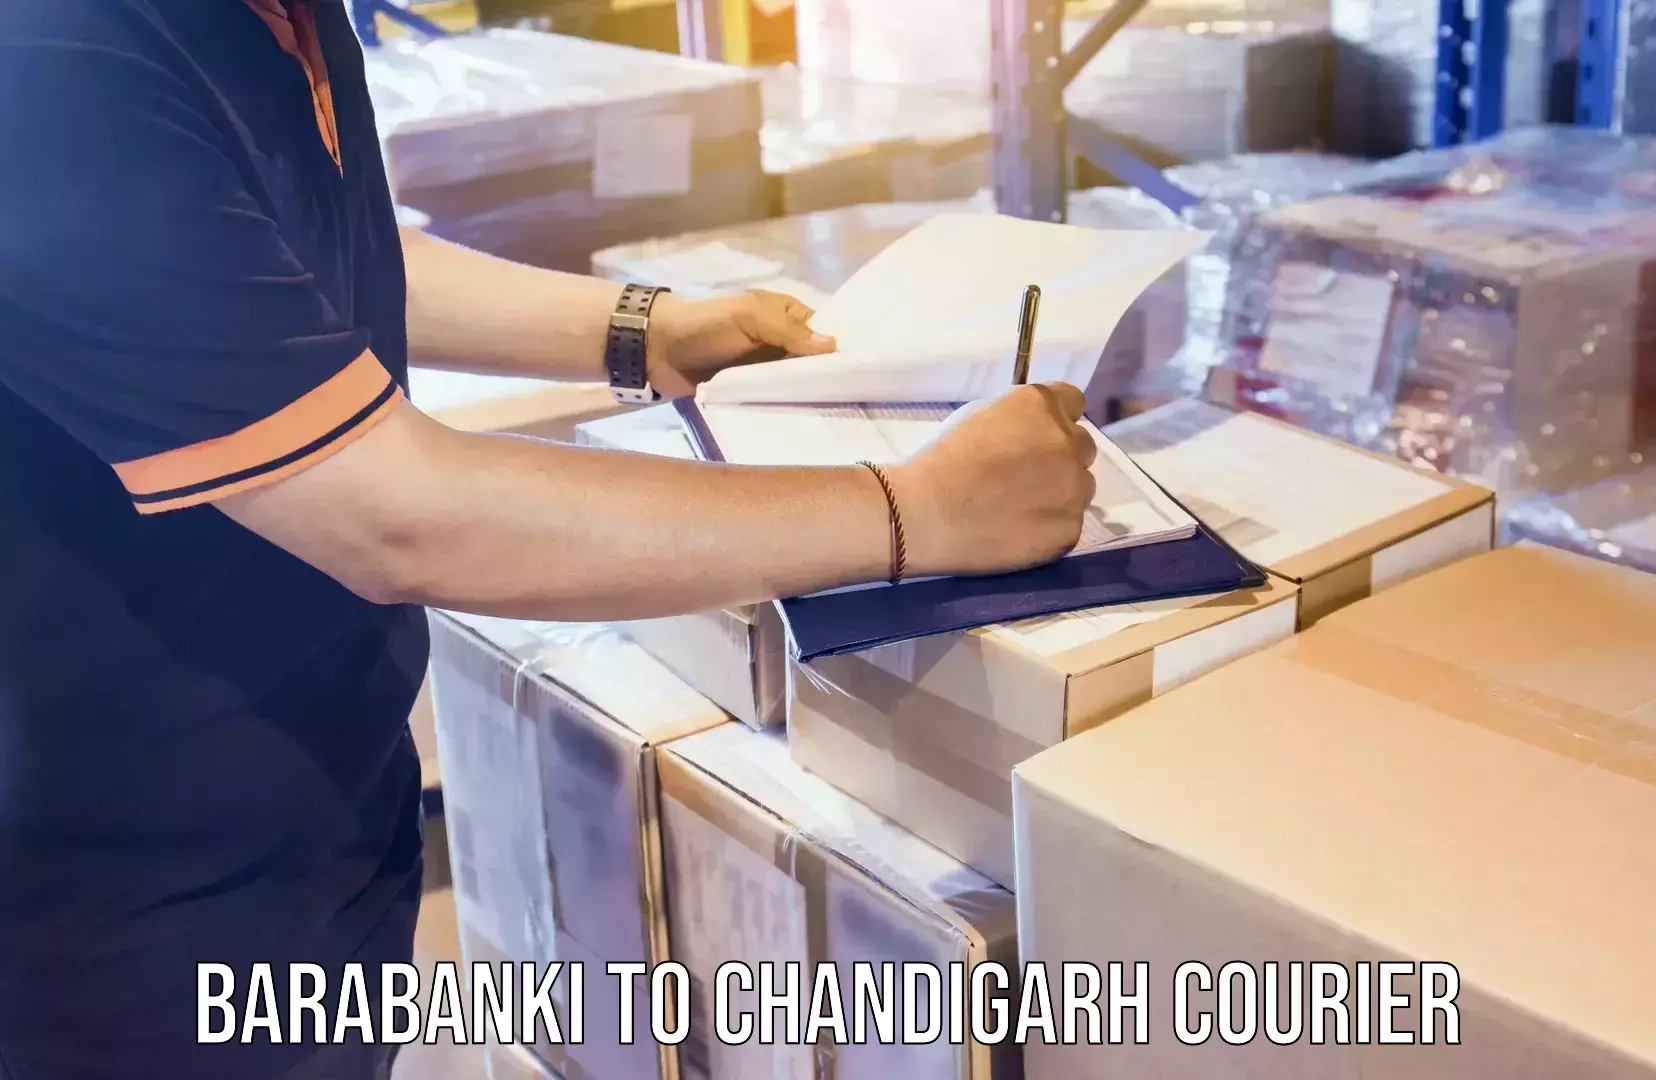 Business delivery service Barabanki to Chandigarh